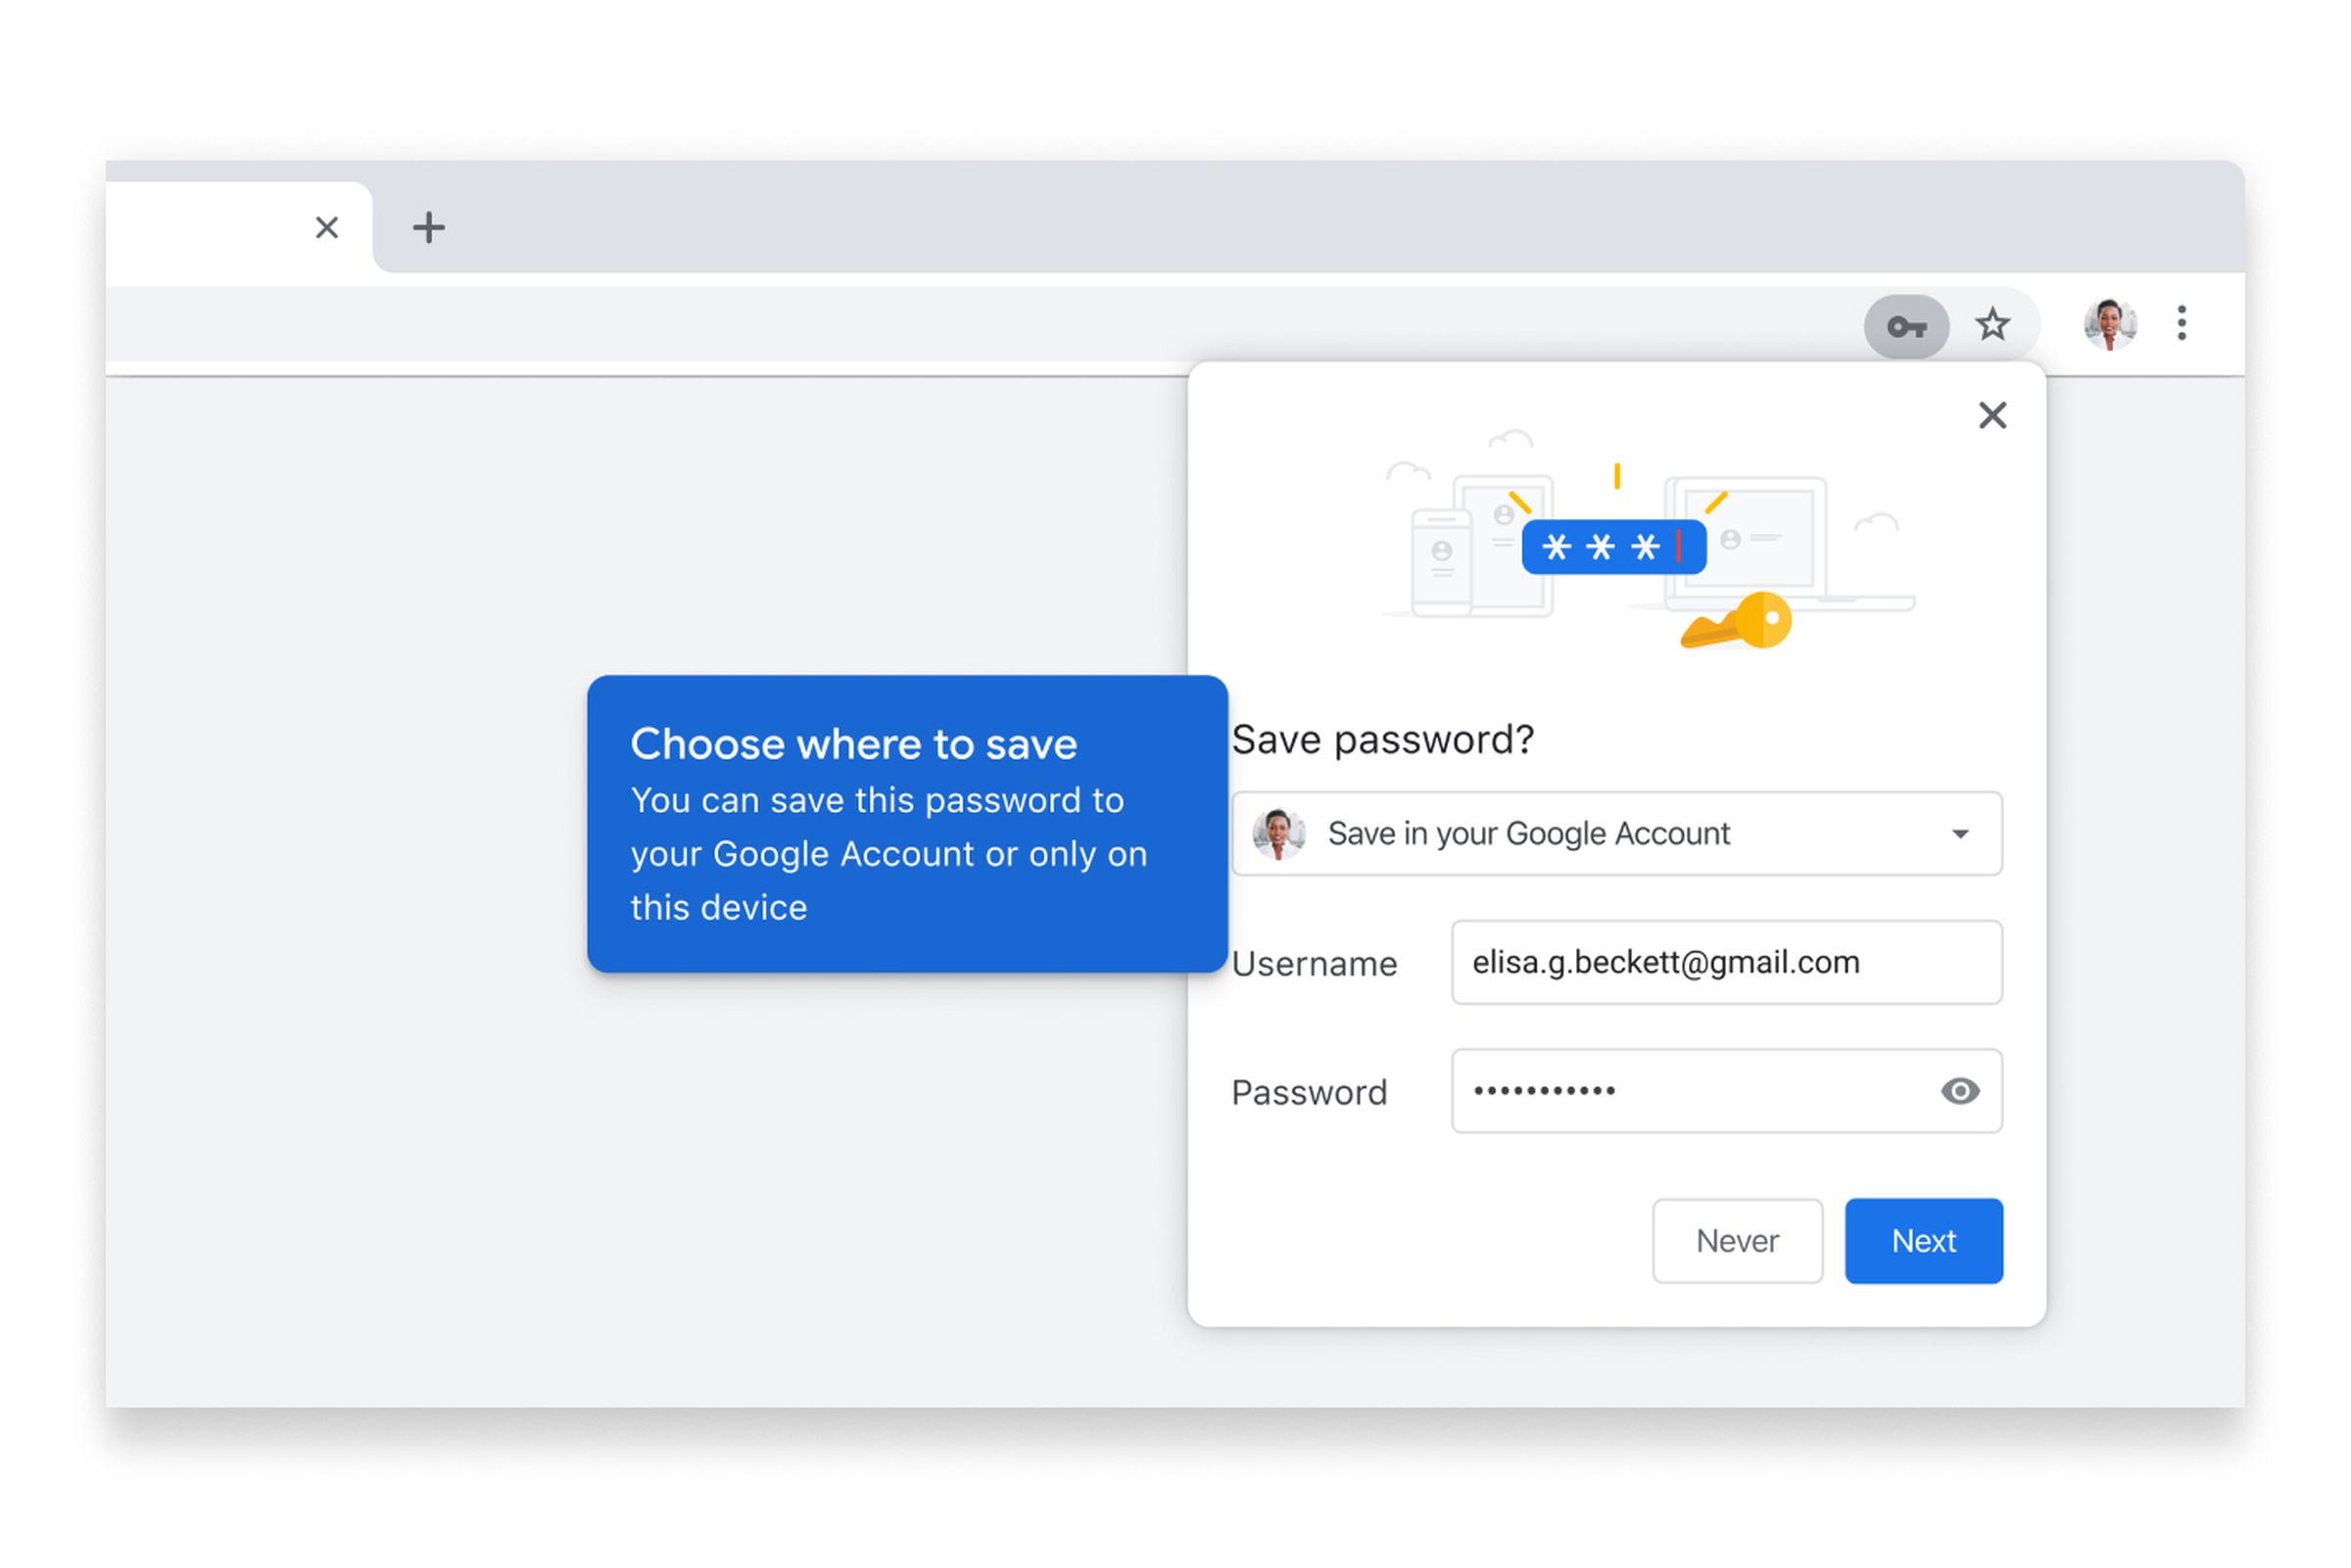 On desktop, you’ll have the option of saving passwords to the device, or to a Google Account.